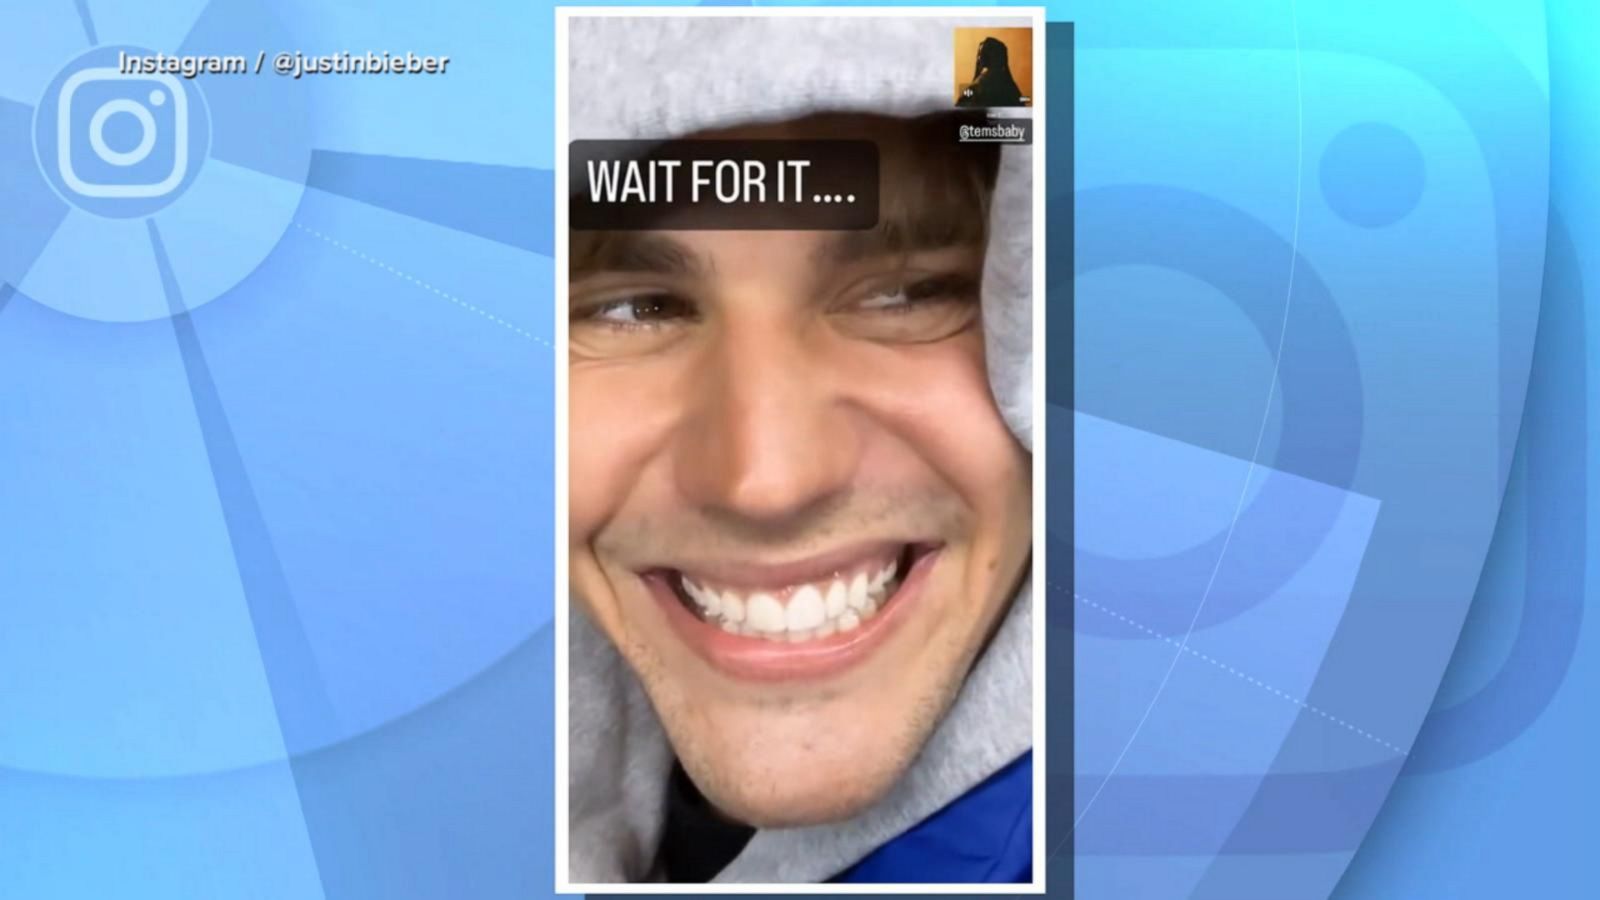 VIDEO: Justin Bieber shares video update on his health